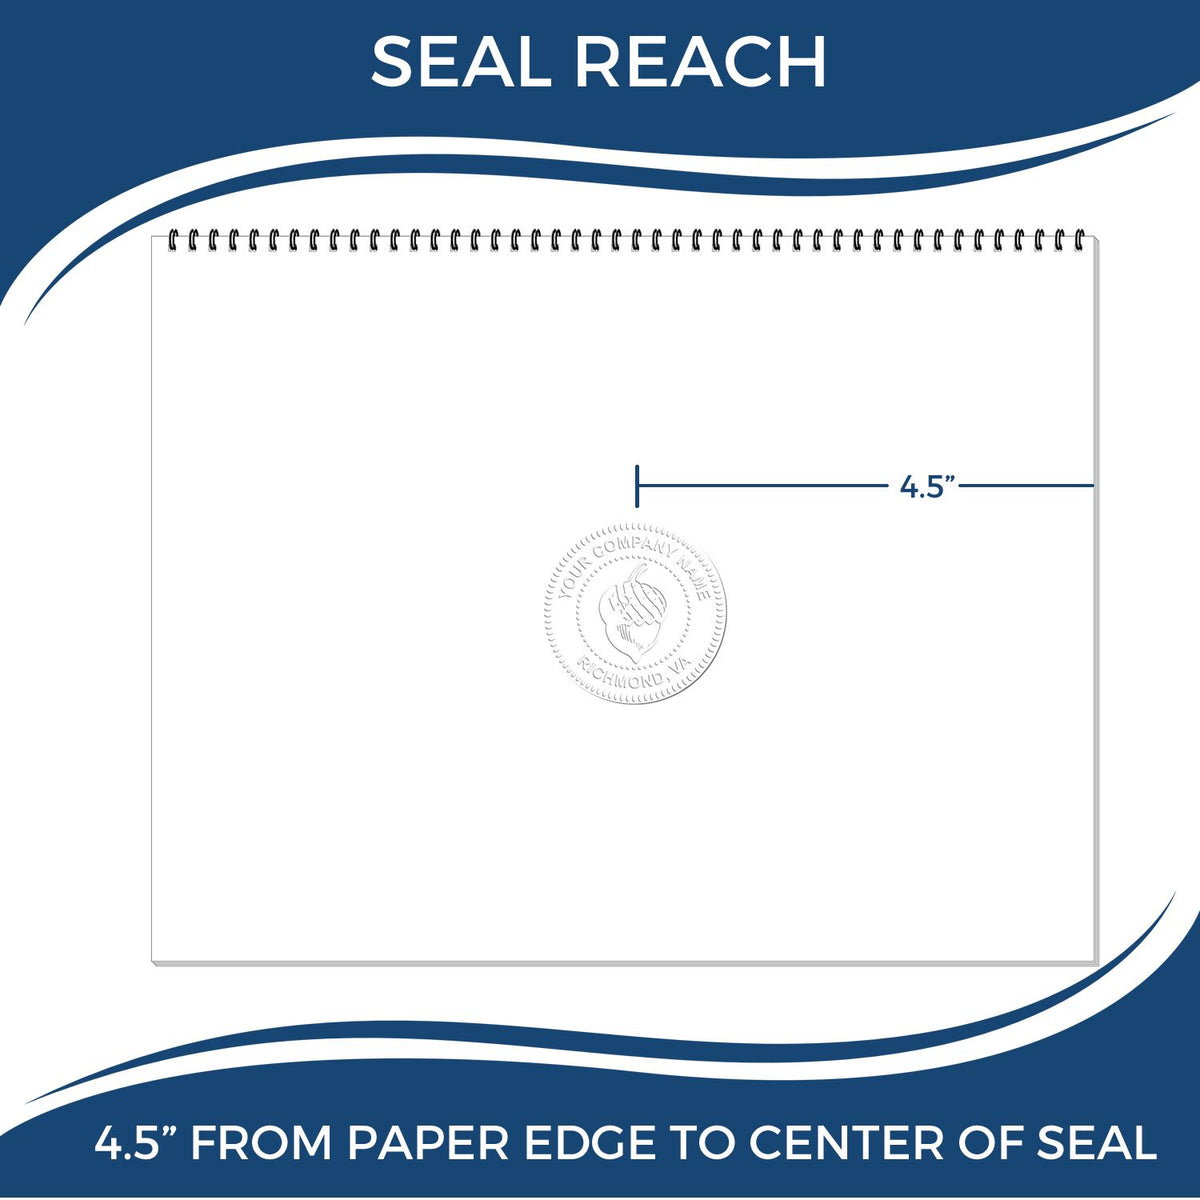 An infographic showing the seal reach which is represented by a ruler and a miniature seal image of the Extended Long Reach Michigan Architect Seal Embosser